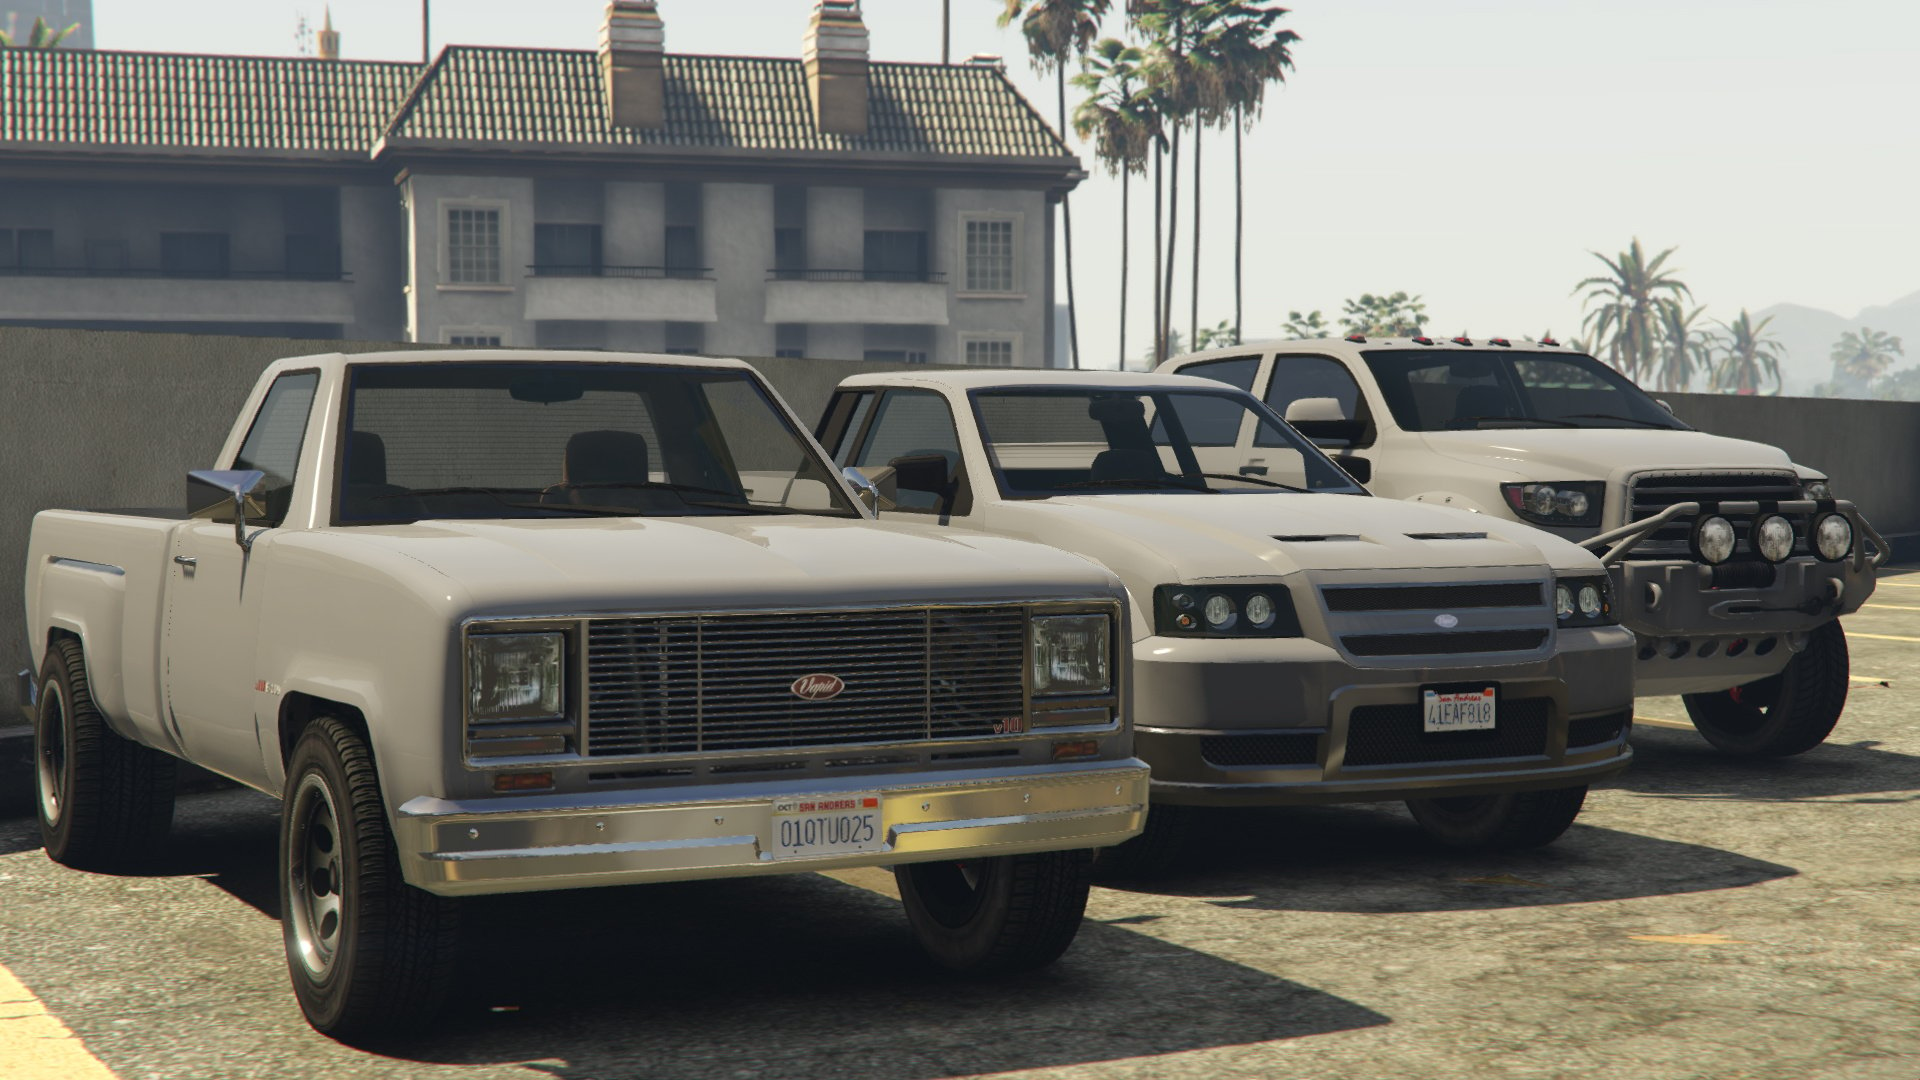 Gta 5 vapid investing latest election betting odds